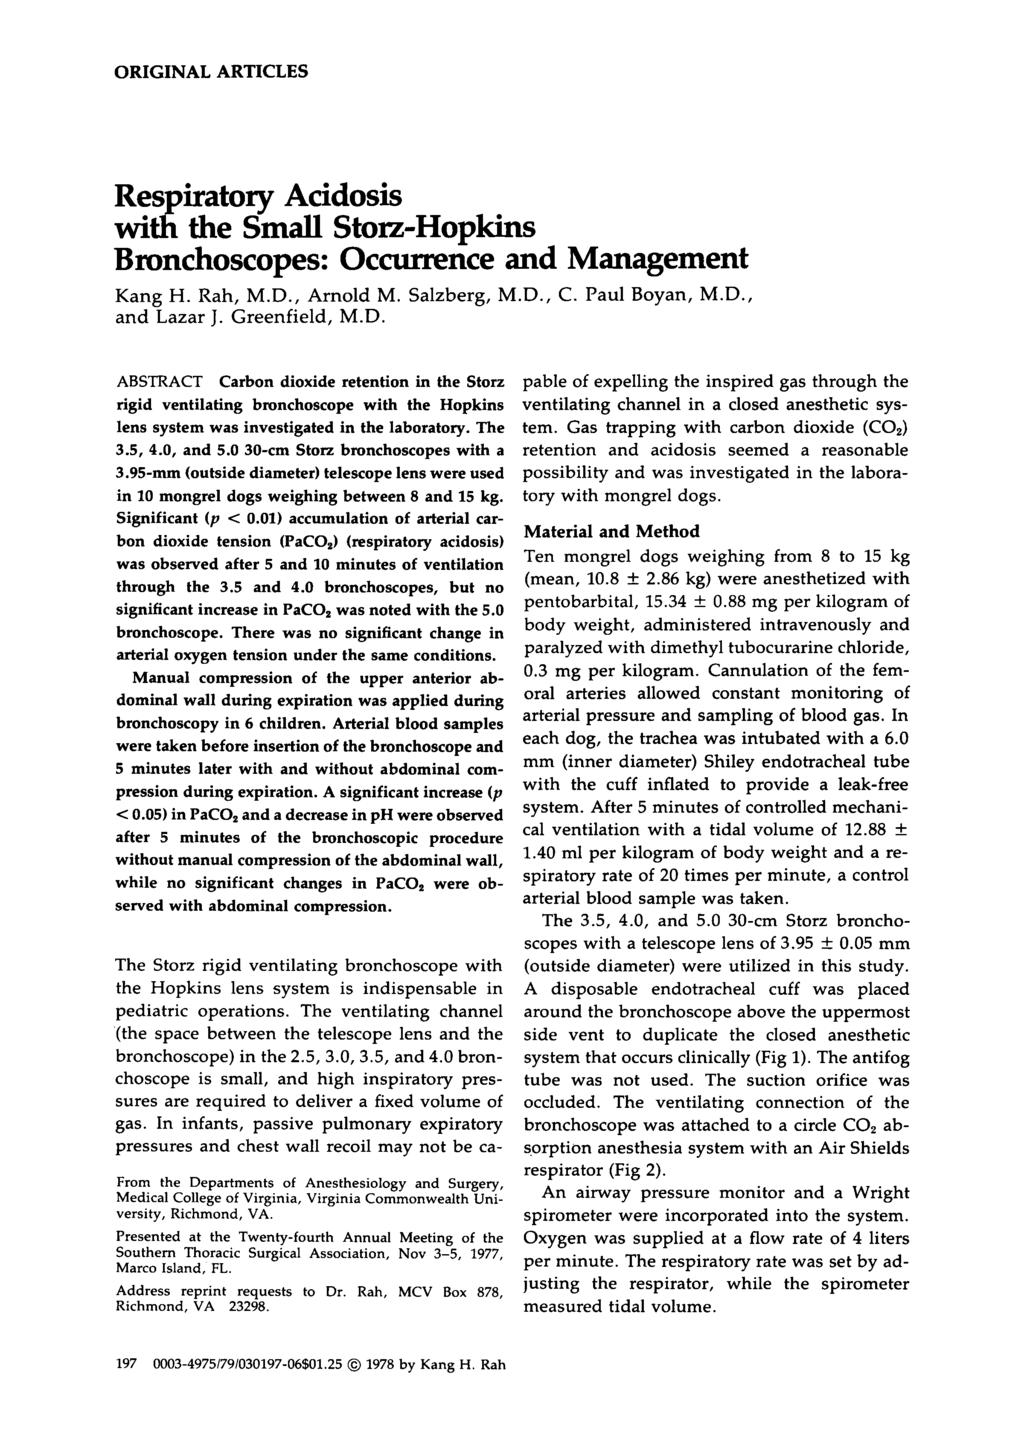 ORIGIAL ARTICLES Res tk iratory Acidosis wi the Small Ston-Hopkins Bronchoscopes: Occurrence and Management Kang H. Rah, M.D., Arnold M. Salzberg, M.D., C. Paul Boyan, M.D., and Lazar J.